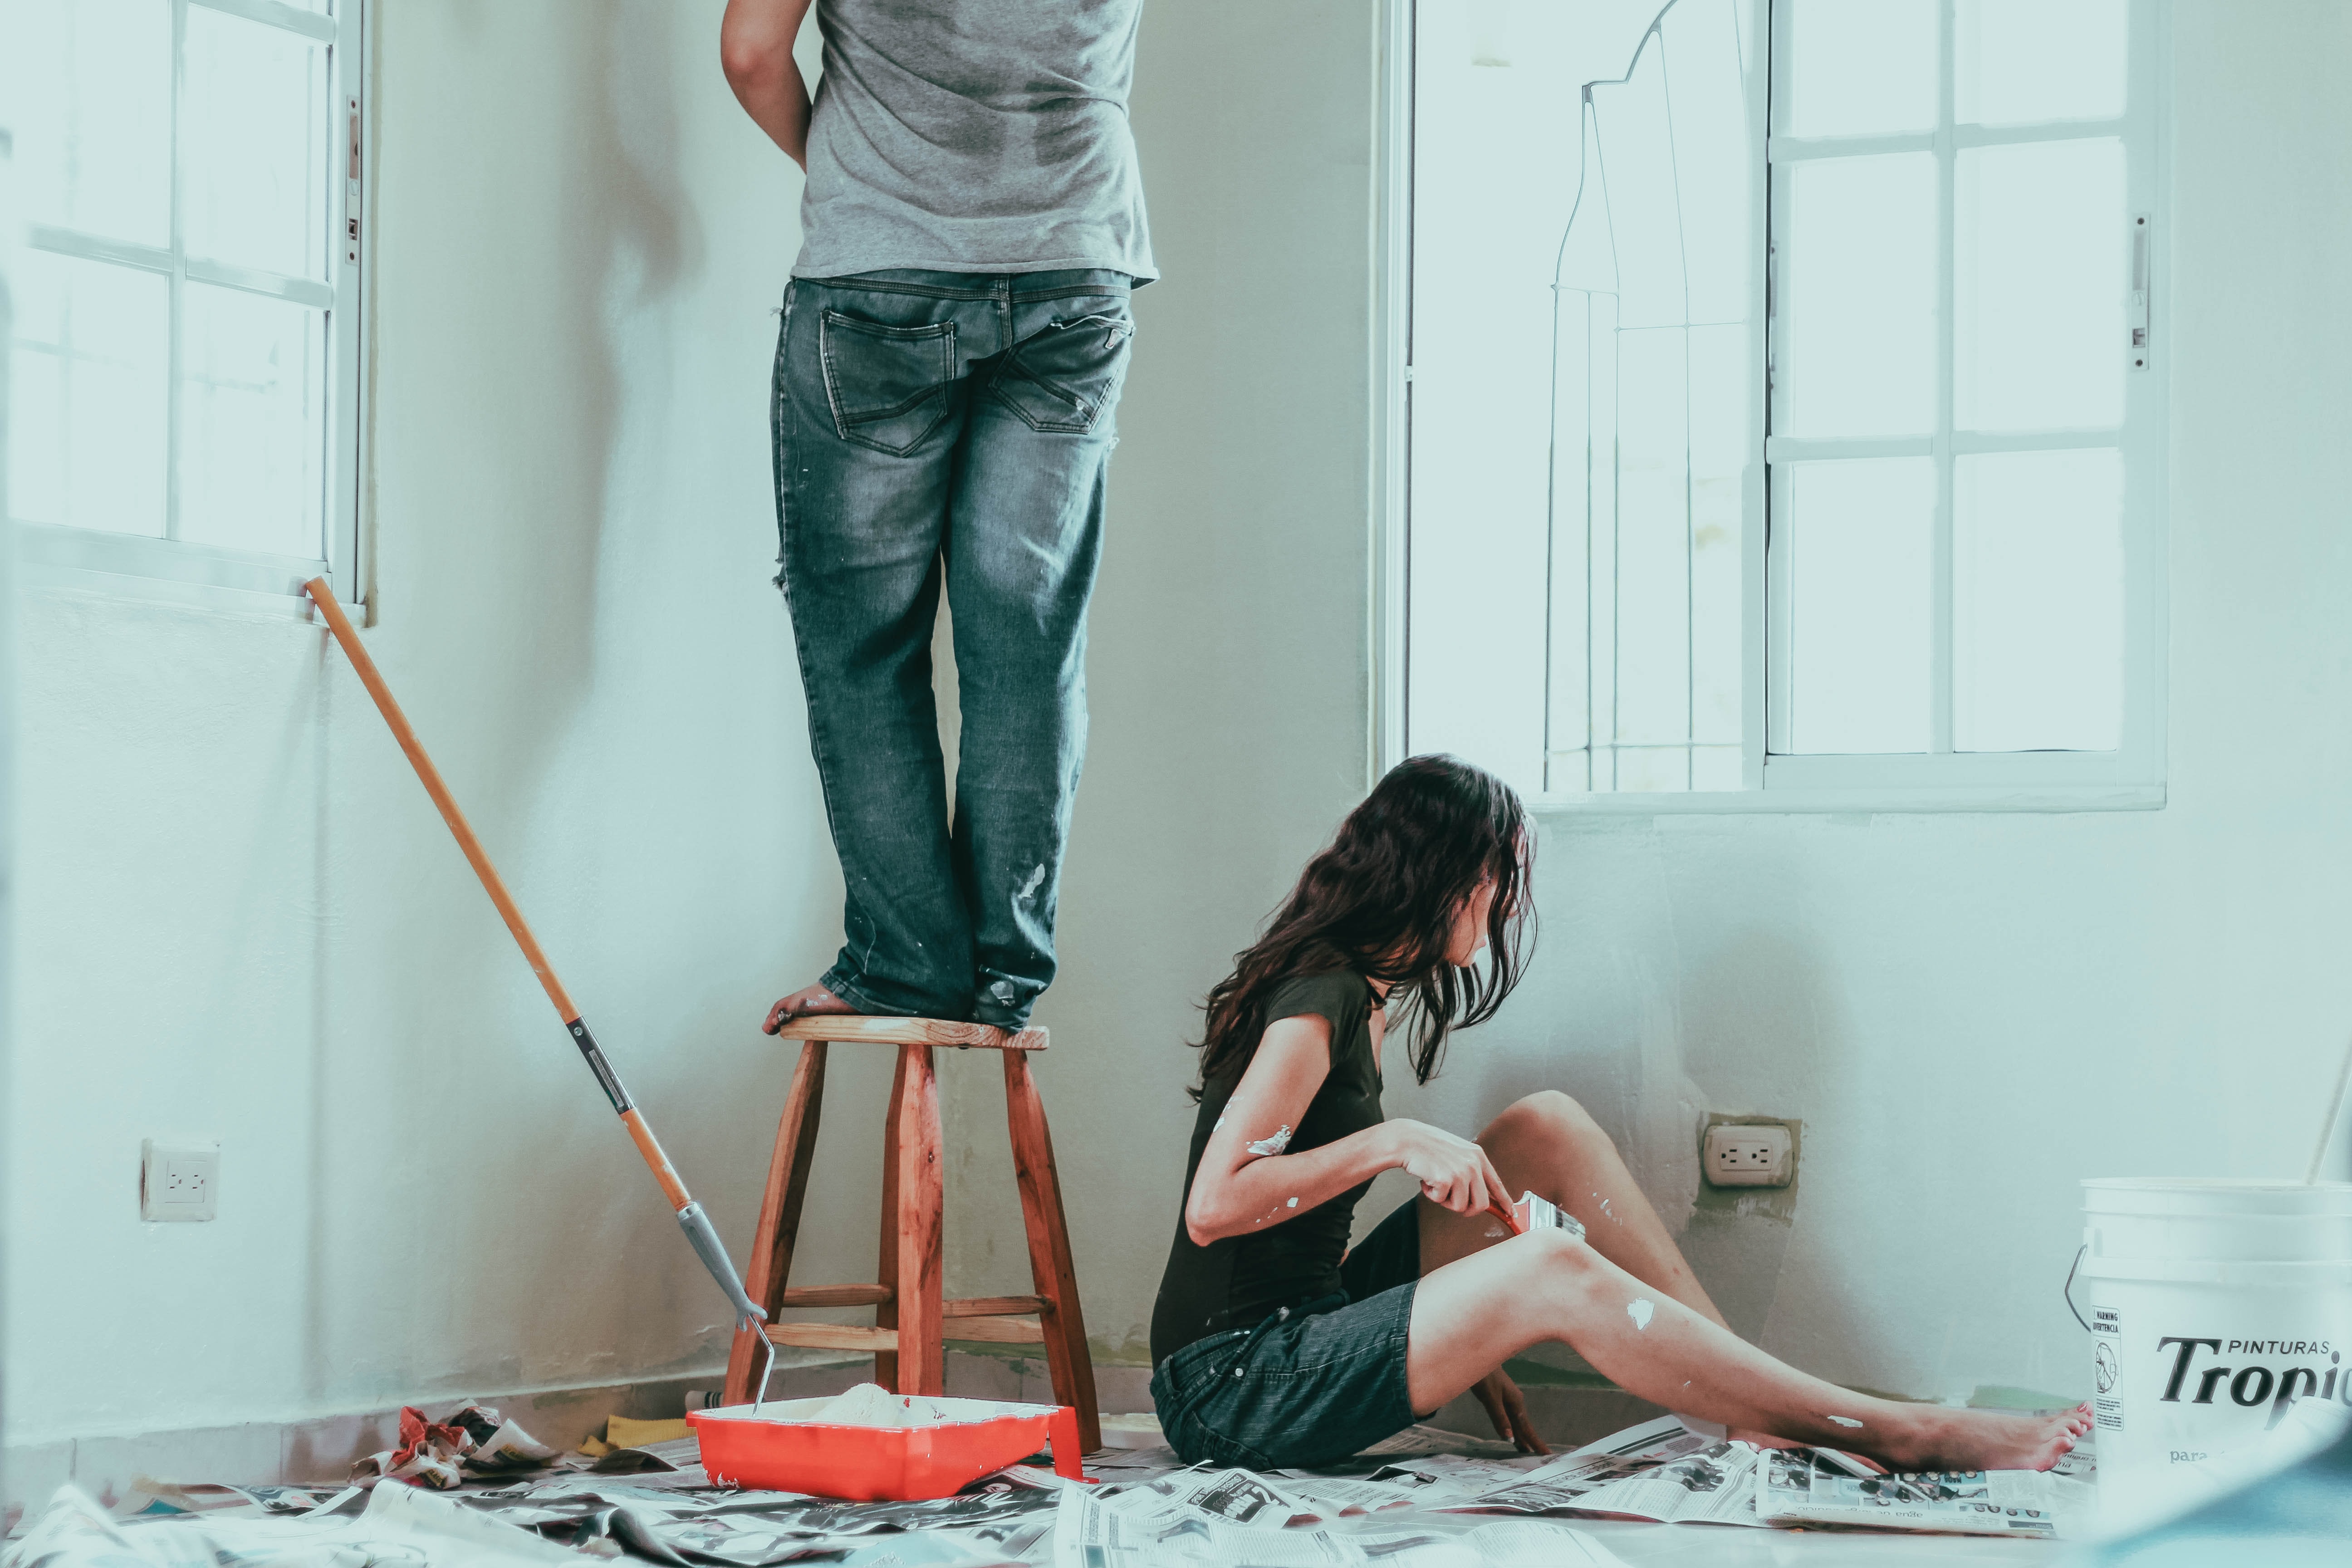 Selling Soon? Home Renovations that Don’t Actually Put Money in Your Pocket Vs Those That Do